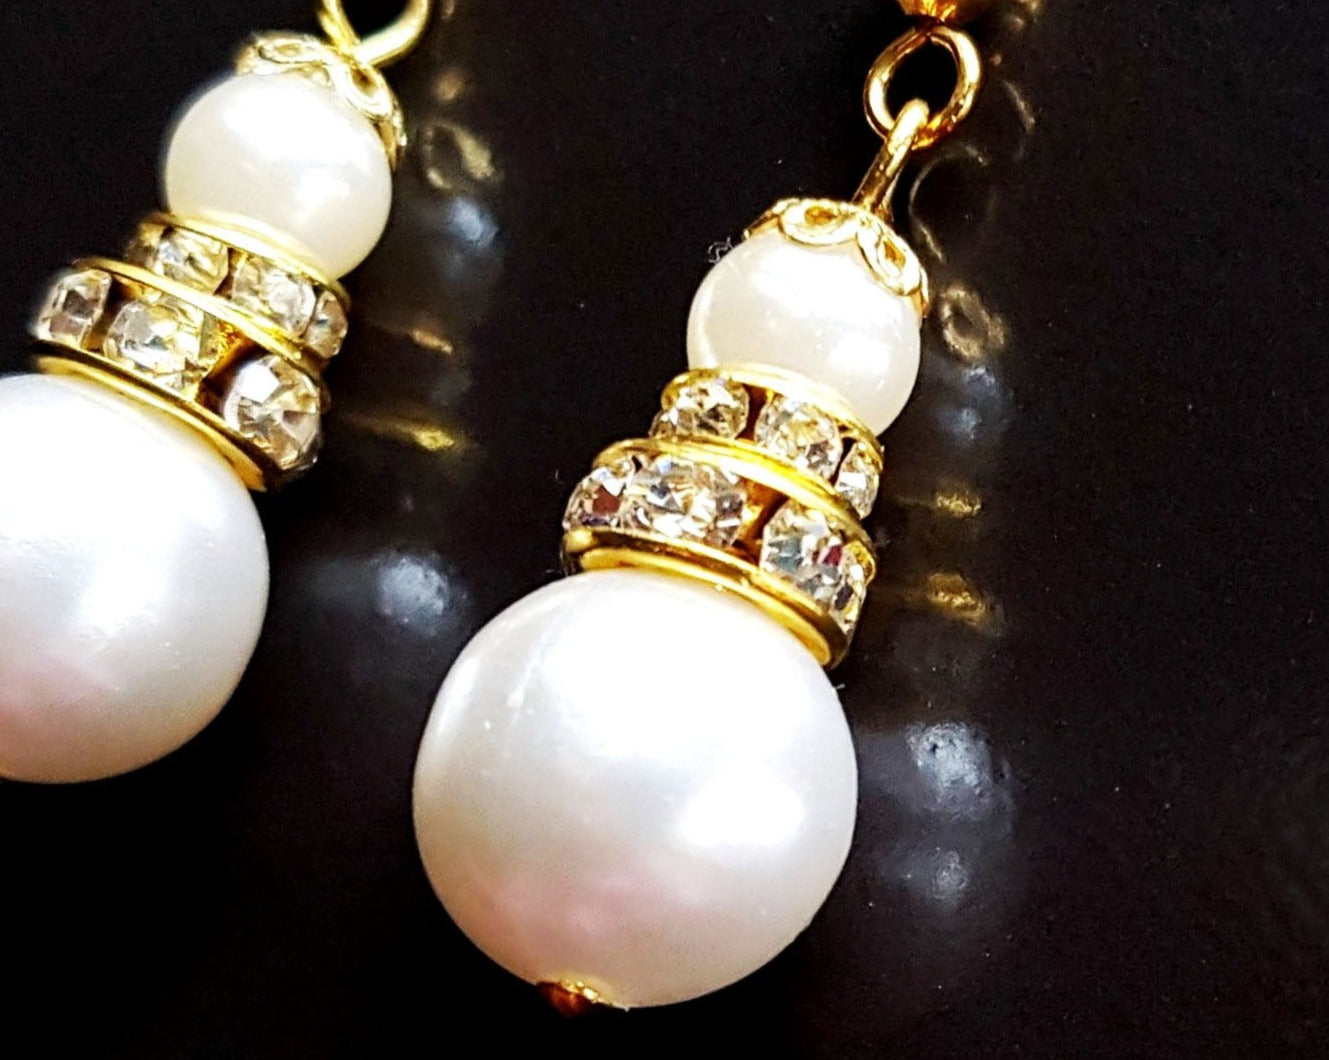 Victorian Style Large Pearl and Crystal Earrings, long dangles earring with large white peals and decorative gold details and crystal. Earrings dangle on french style earring hooks 